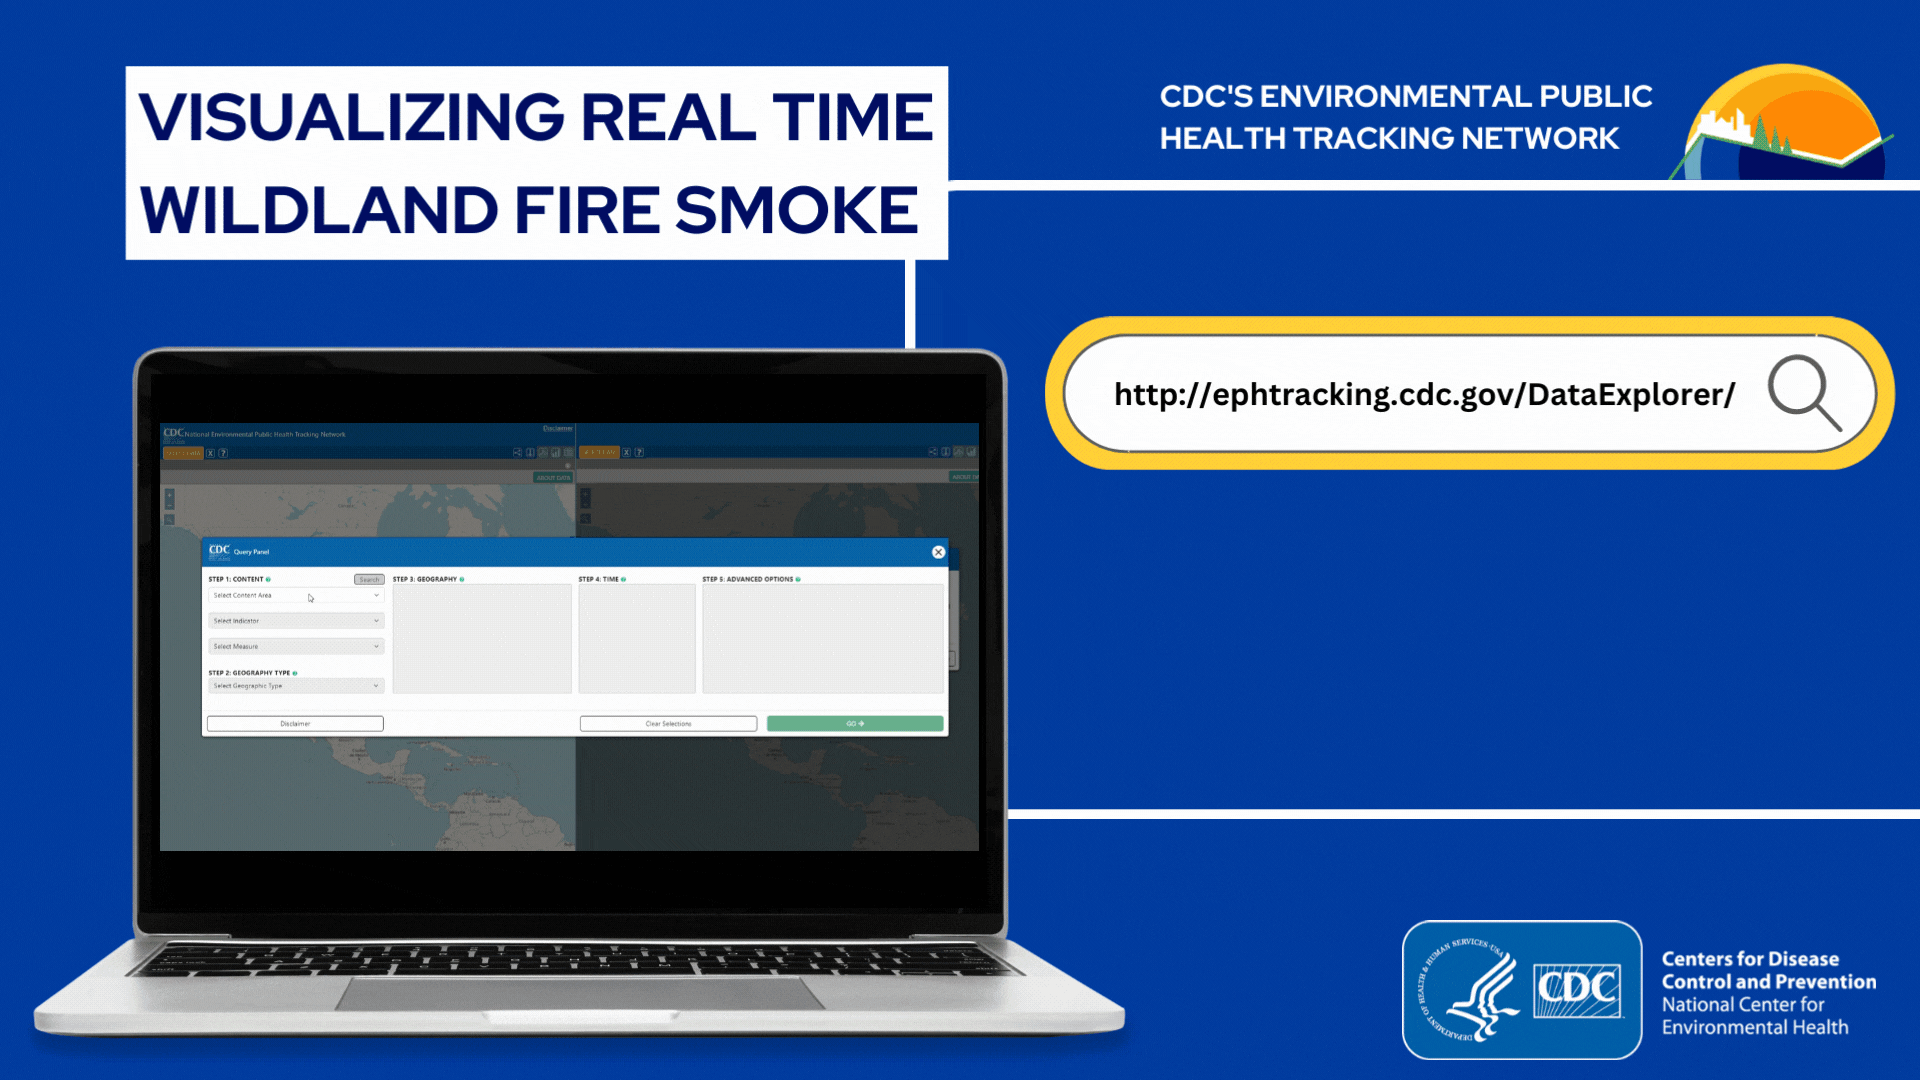 Visualizing Real Time Wildland Fire Smoke using CDC's Tracking Network Data Explorer tool - animated graphic showing website on laptop.